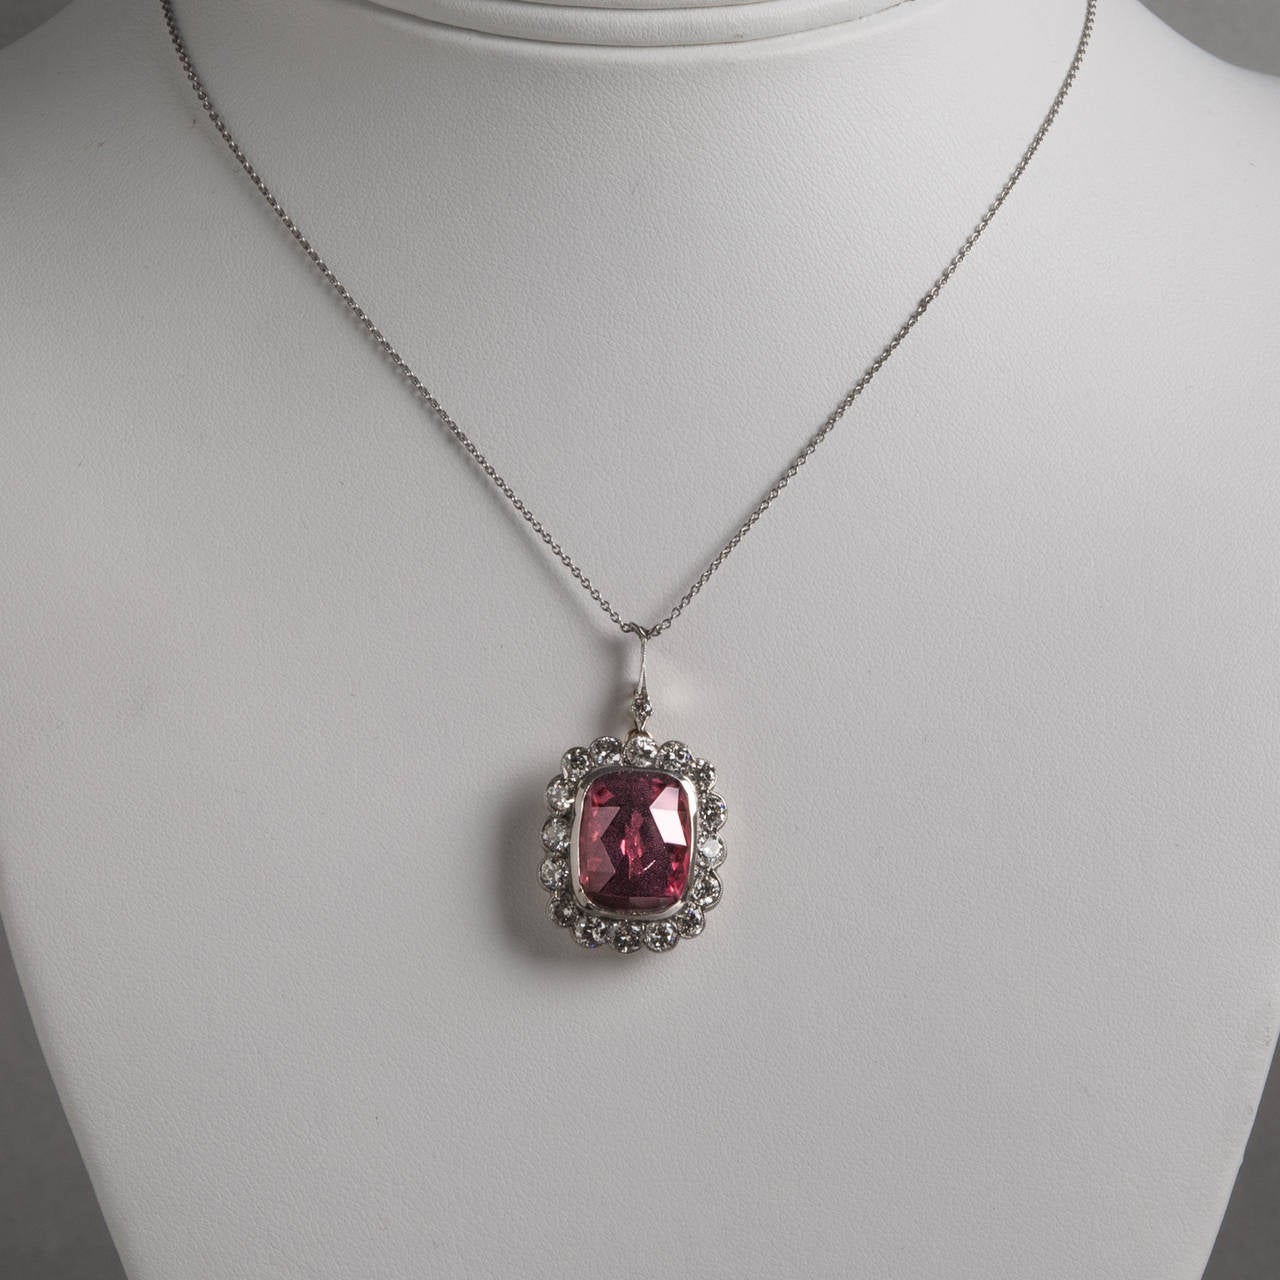 A gorgeous 8.61 carat rubelite tourmaline and diamond pendant. The vibrant red-pink tourmaline gemstone is surrounded by 1.60 carats of sparkling diamonds and set in two-tone 14 karat gold. The pendant rests on a 17″ chain.